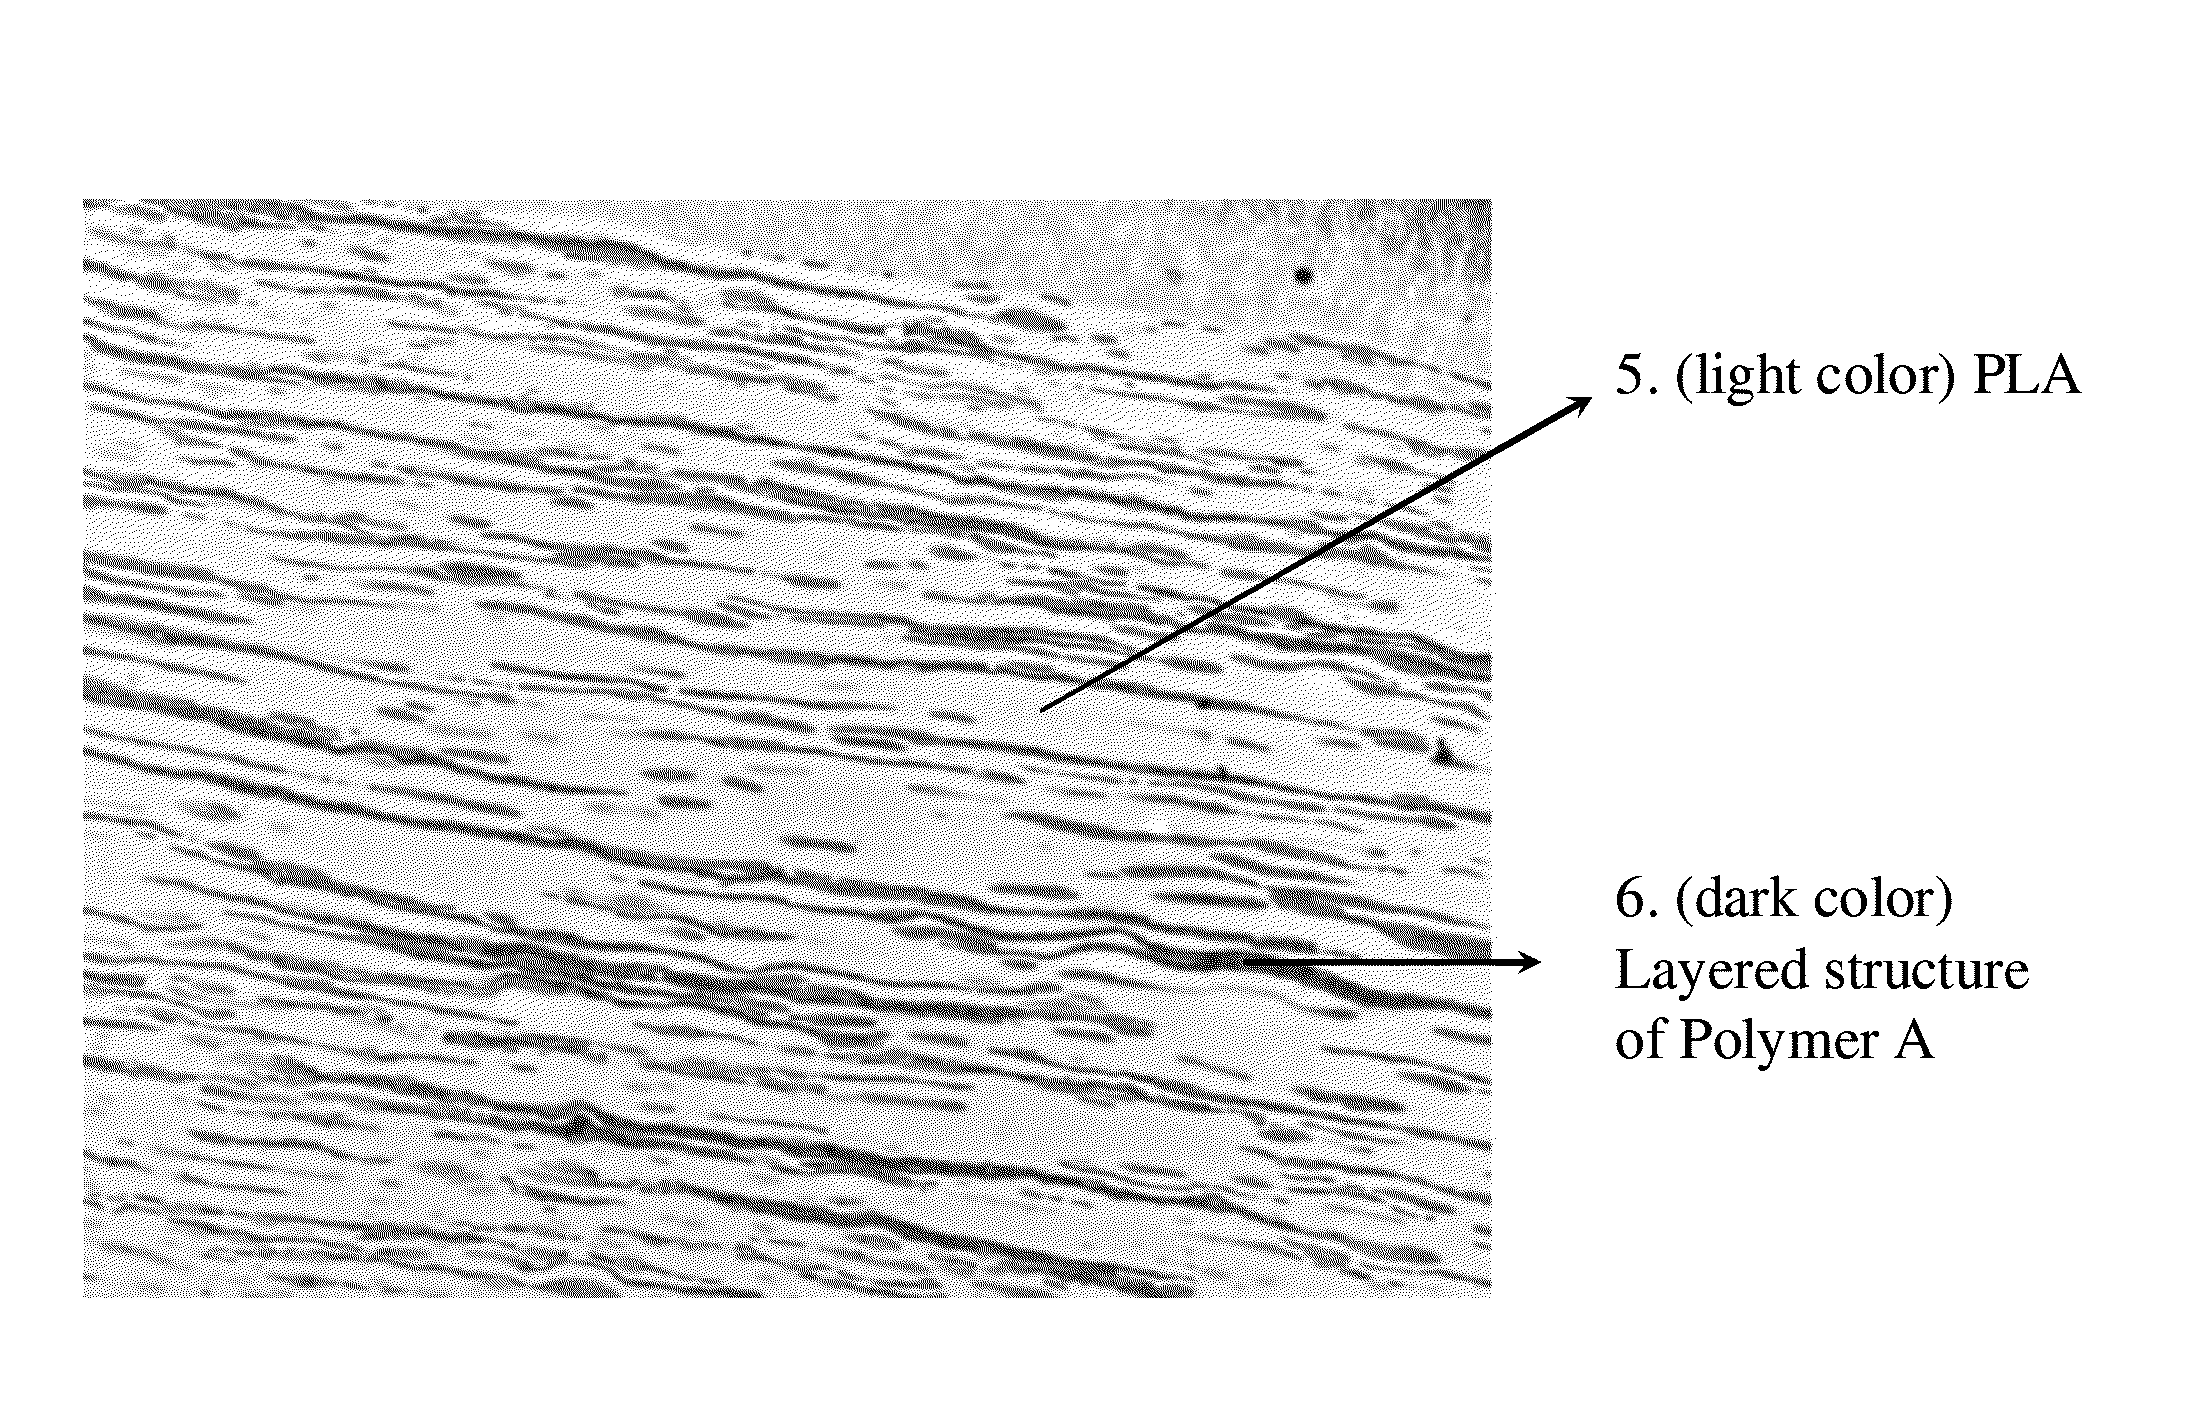 Biaxially oriented polylactic acid film with reduced noise level